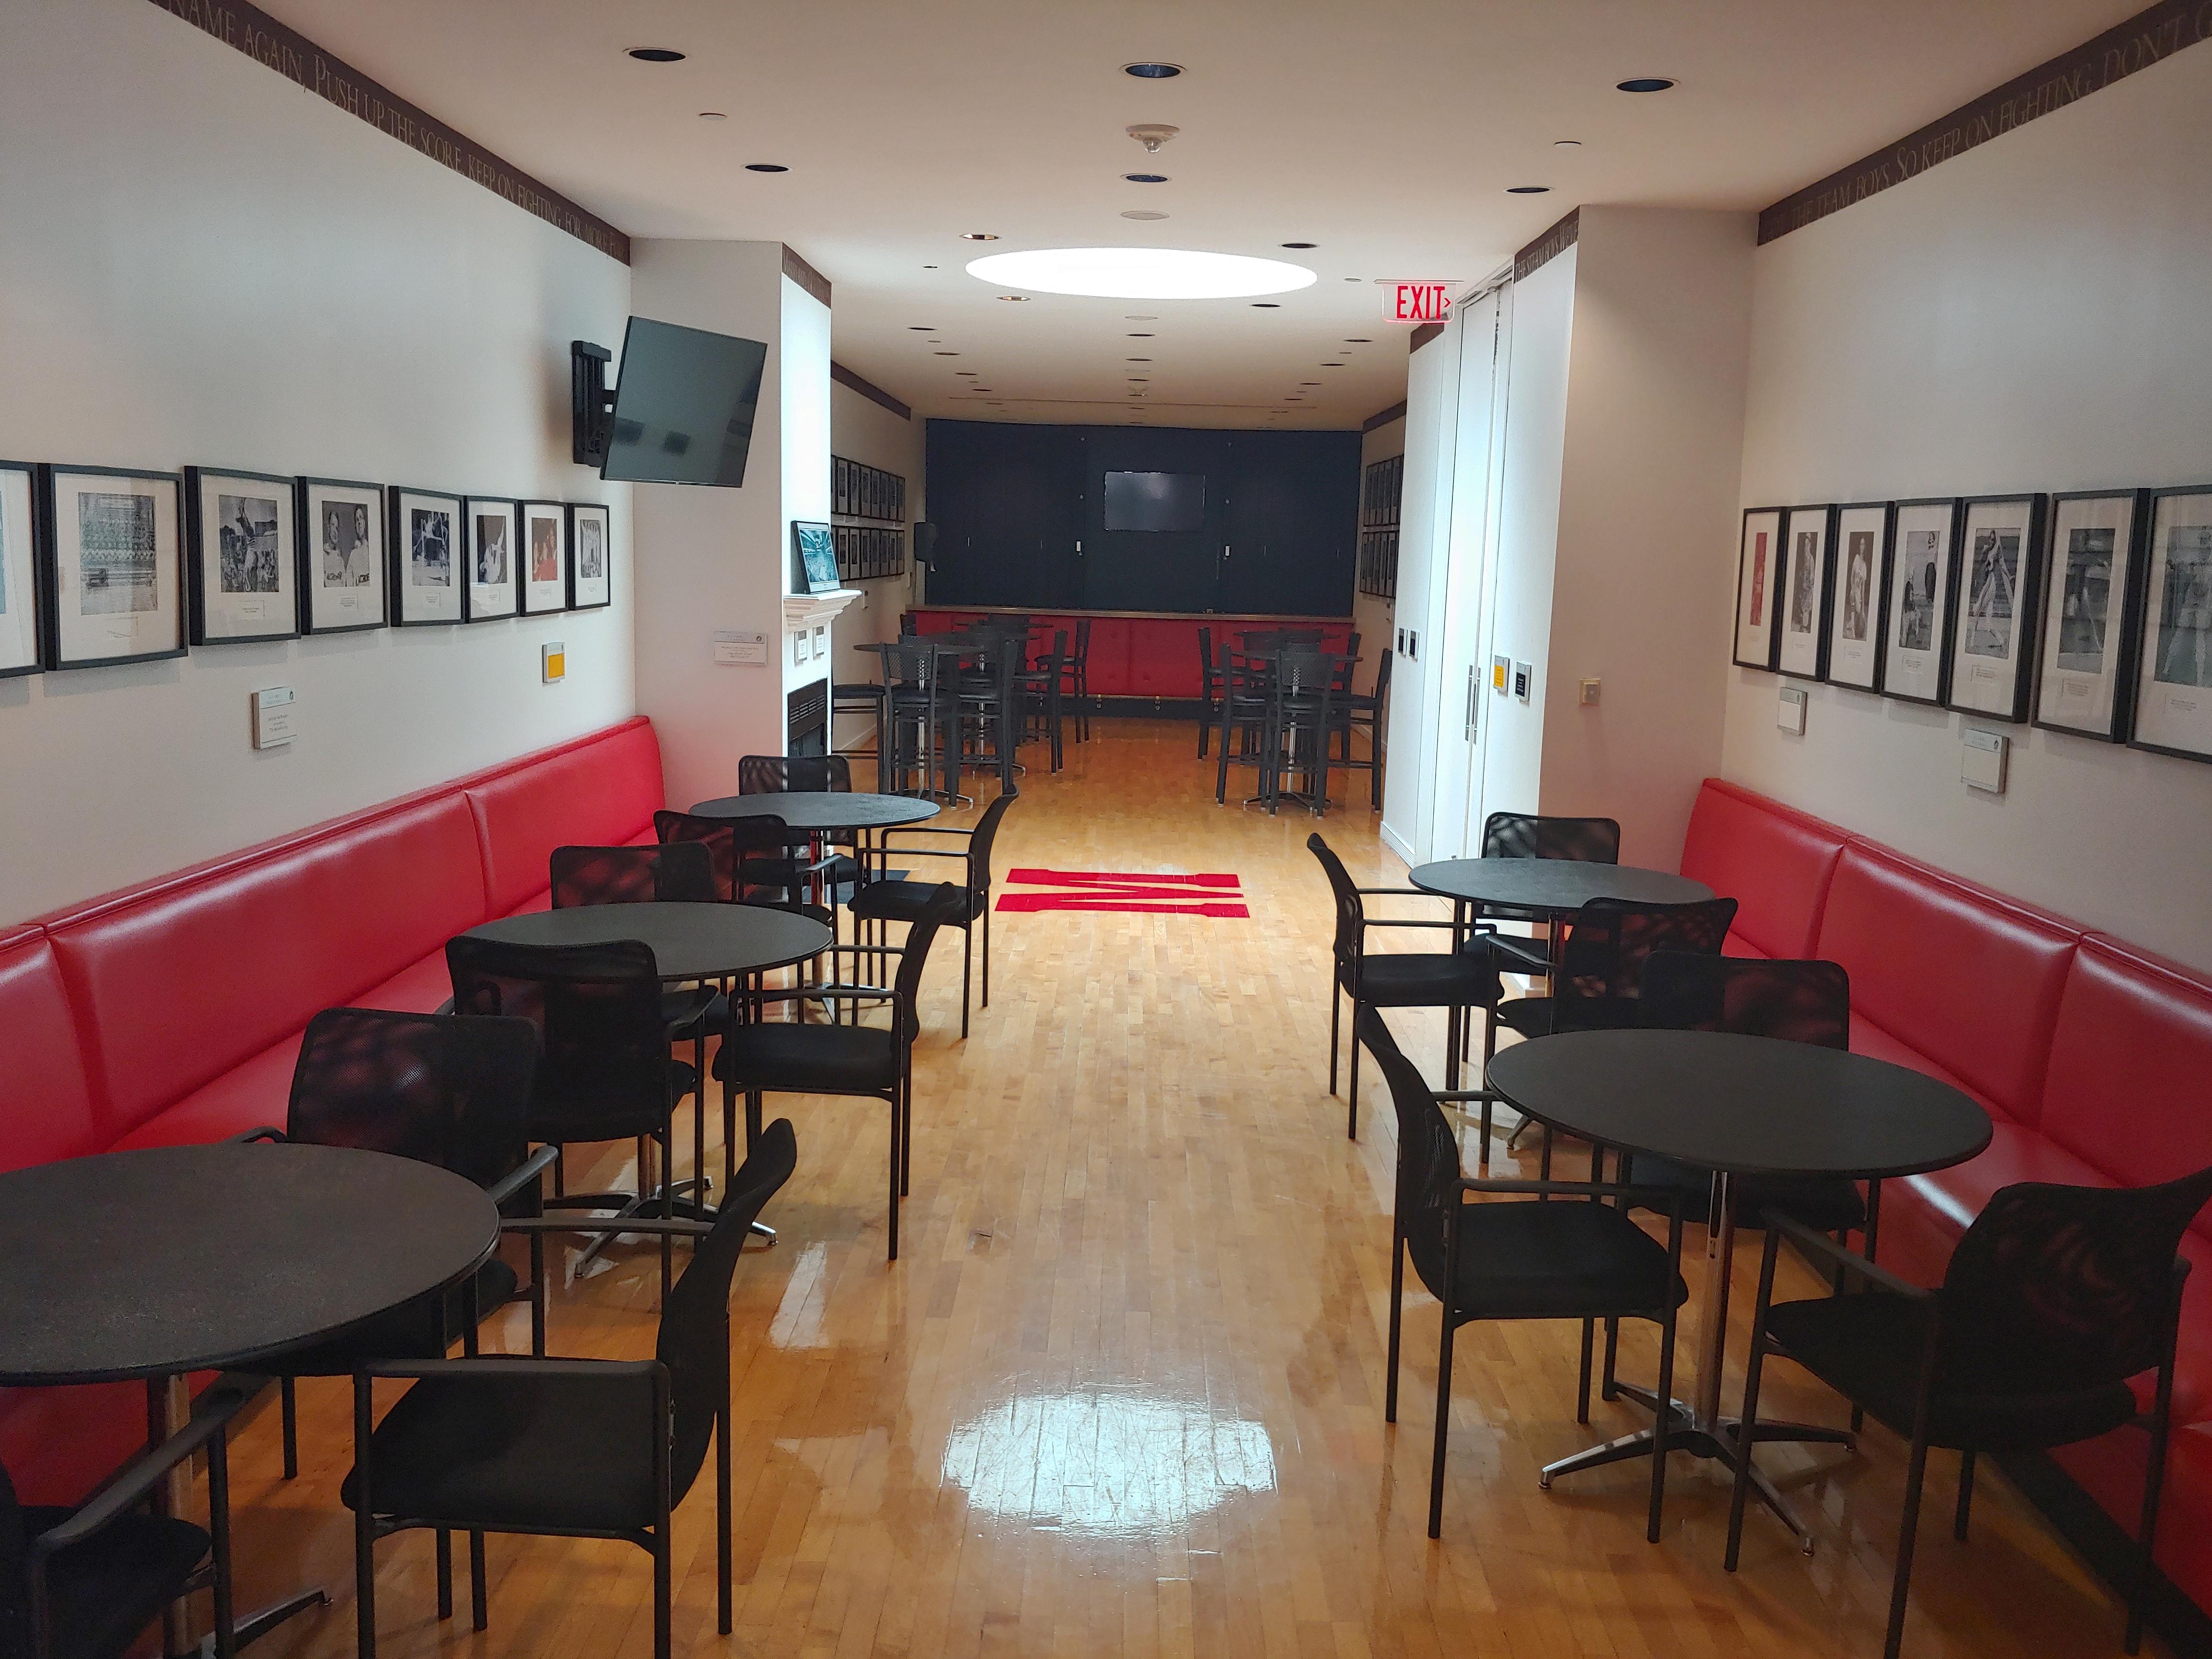 Sports bar with low black tables and chairs and red benches lining the wall